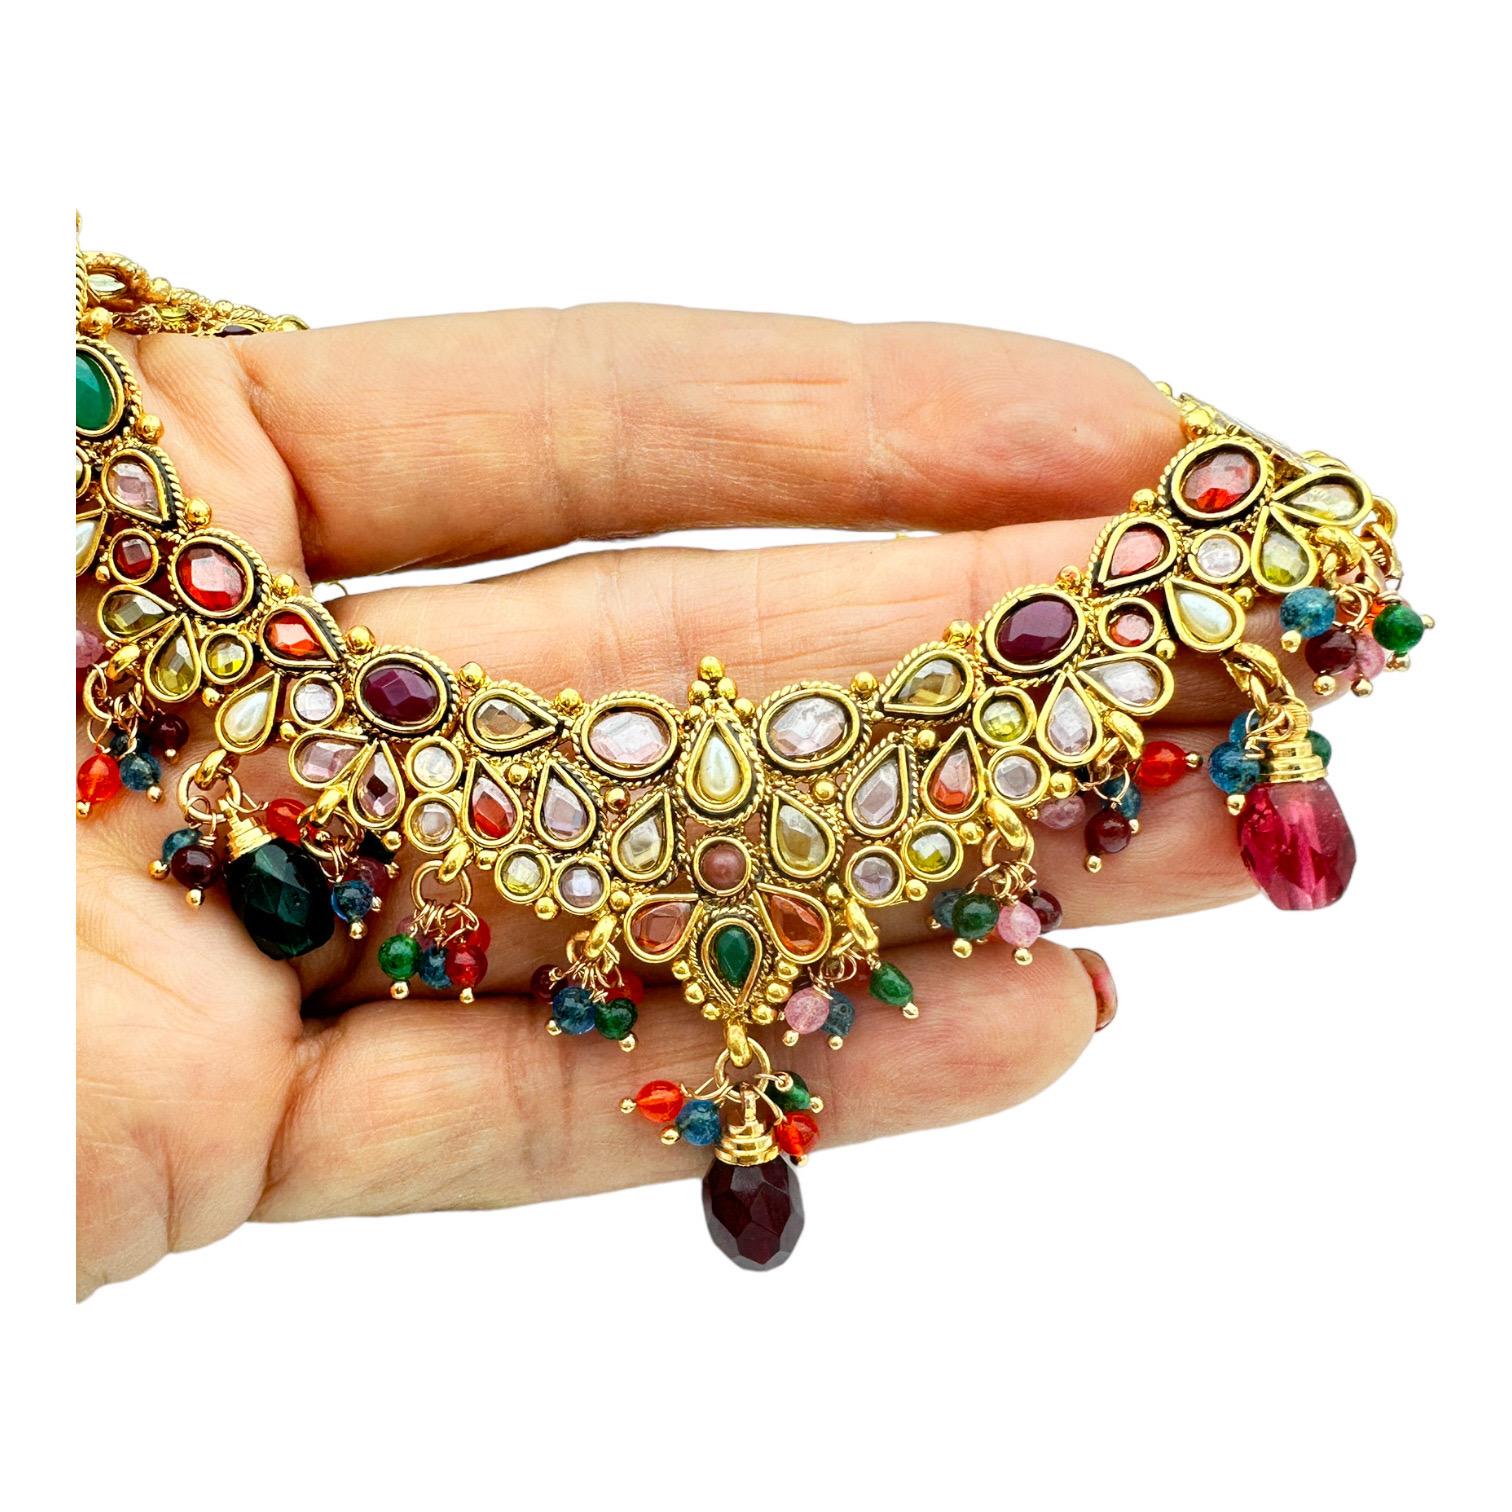 Add a touch of luxuriousness to your look with the Egyptian necklace. This ornate choker features an exquisite handmade design, delicately crafted using color to create a truly unique piece. Wear it day or night for a glamorous finish every